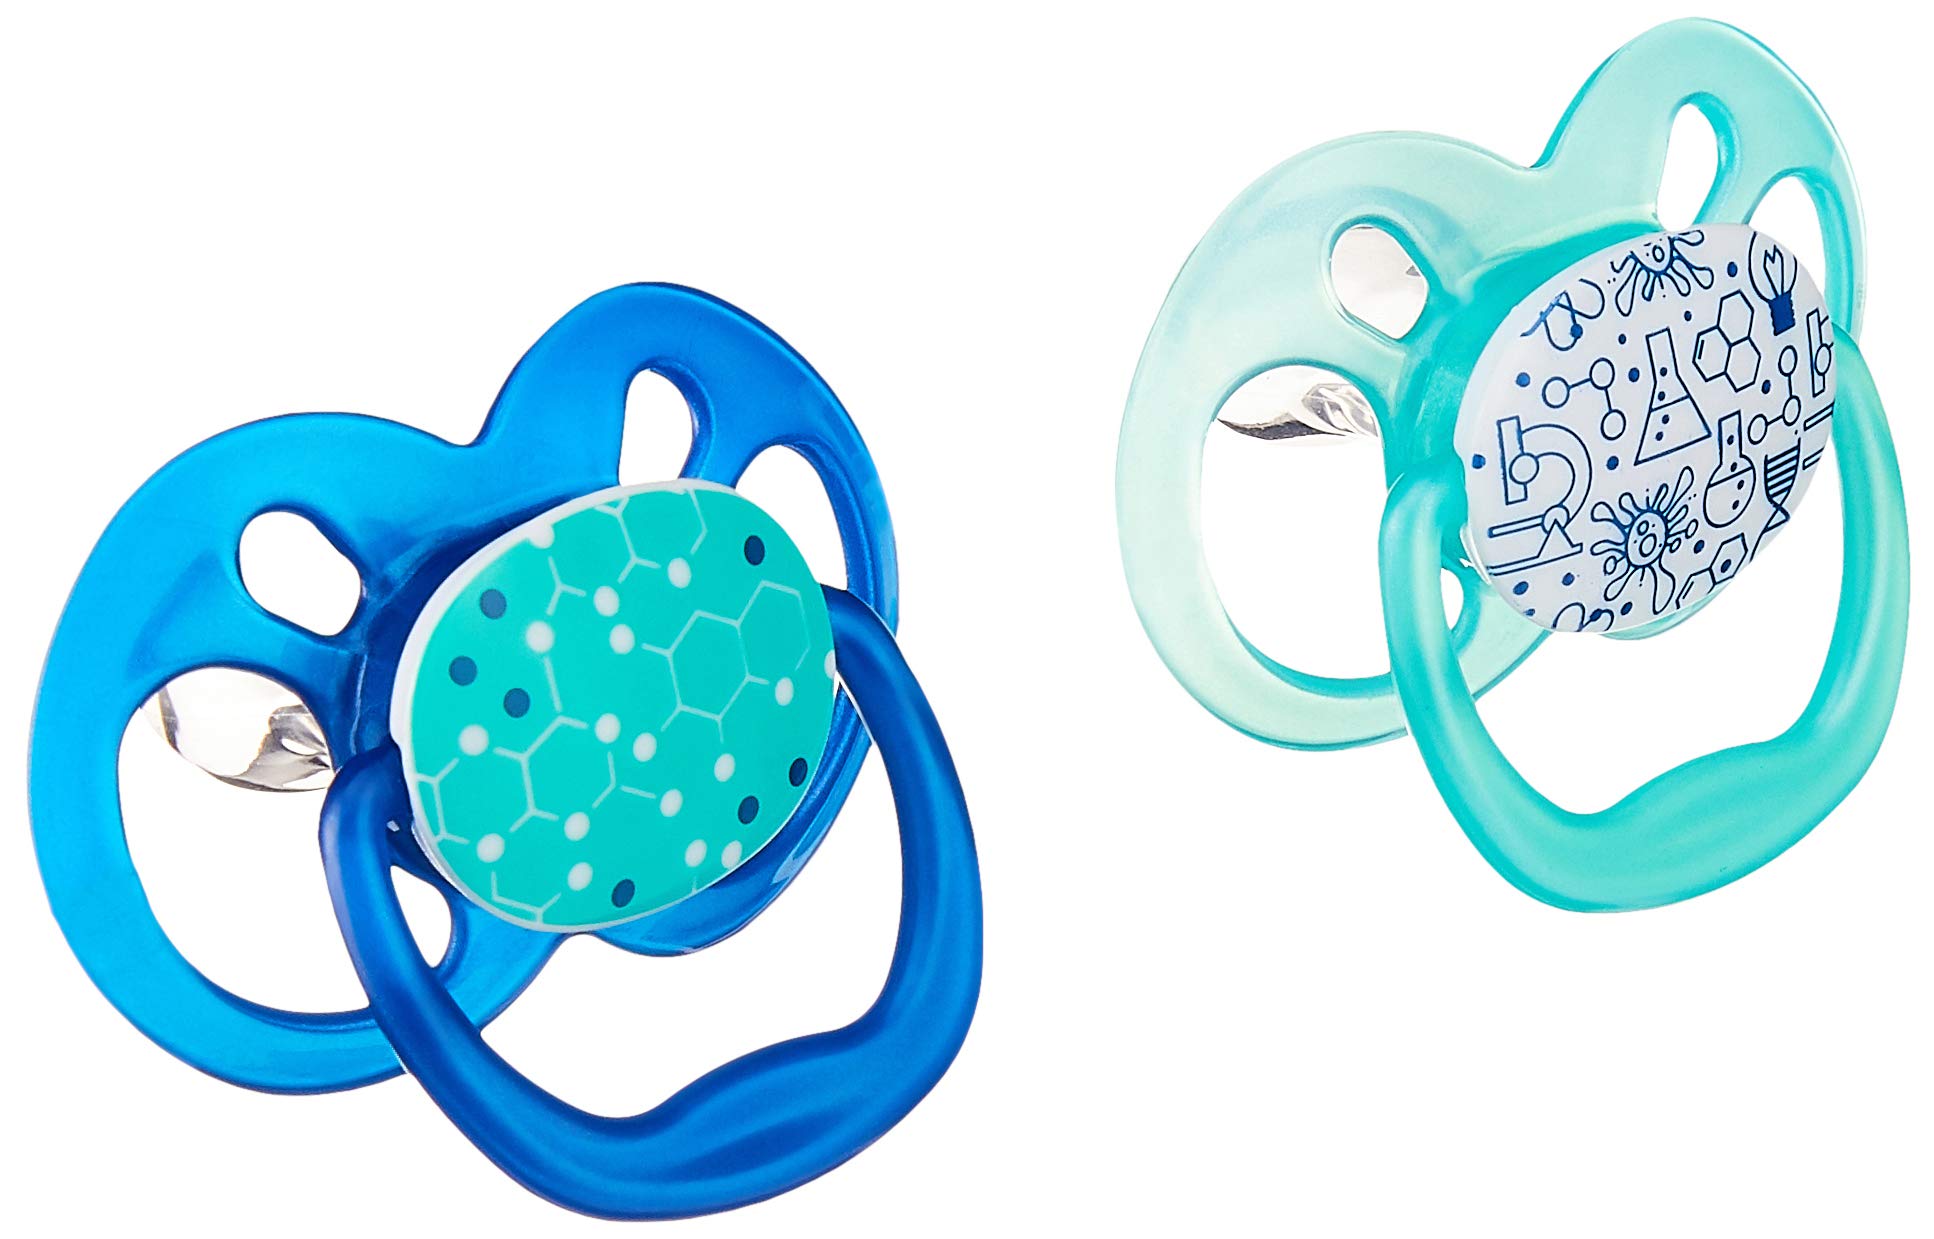 Dr. Brown's Advantage Pacifiers, Stage 1, Pack of 2 - Blue Chemistry